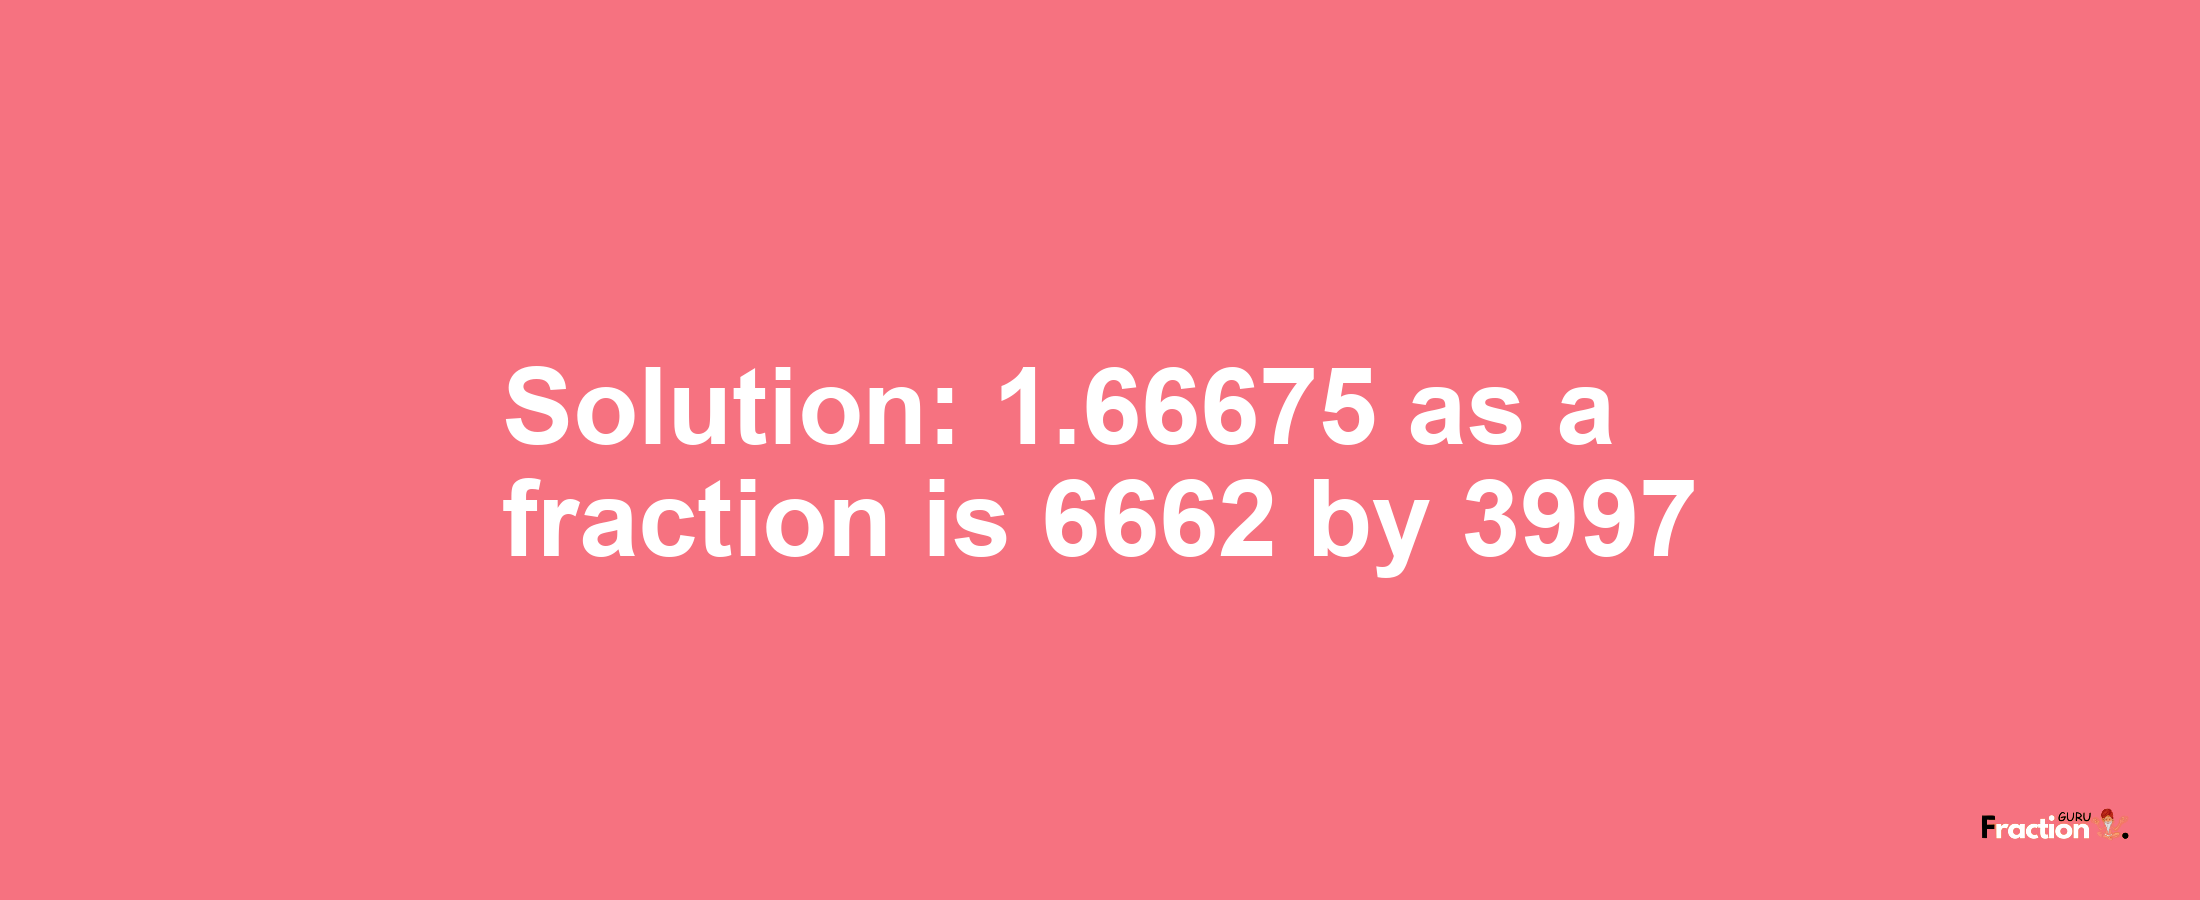 Solution:1.66675 as a fraction is 6662/3997